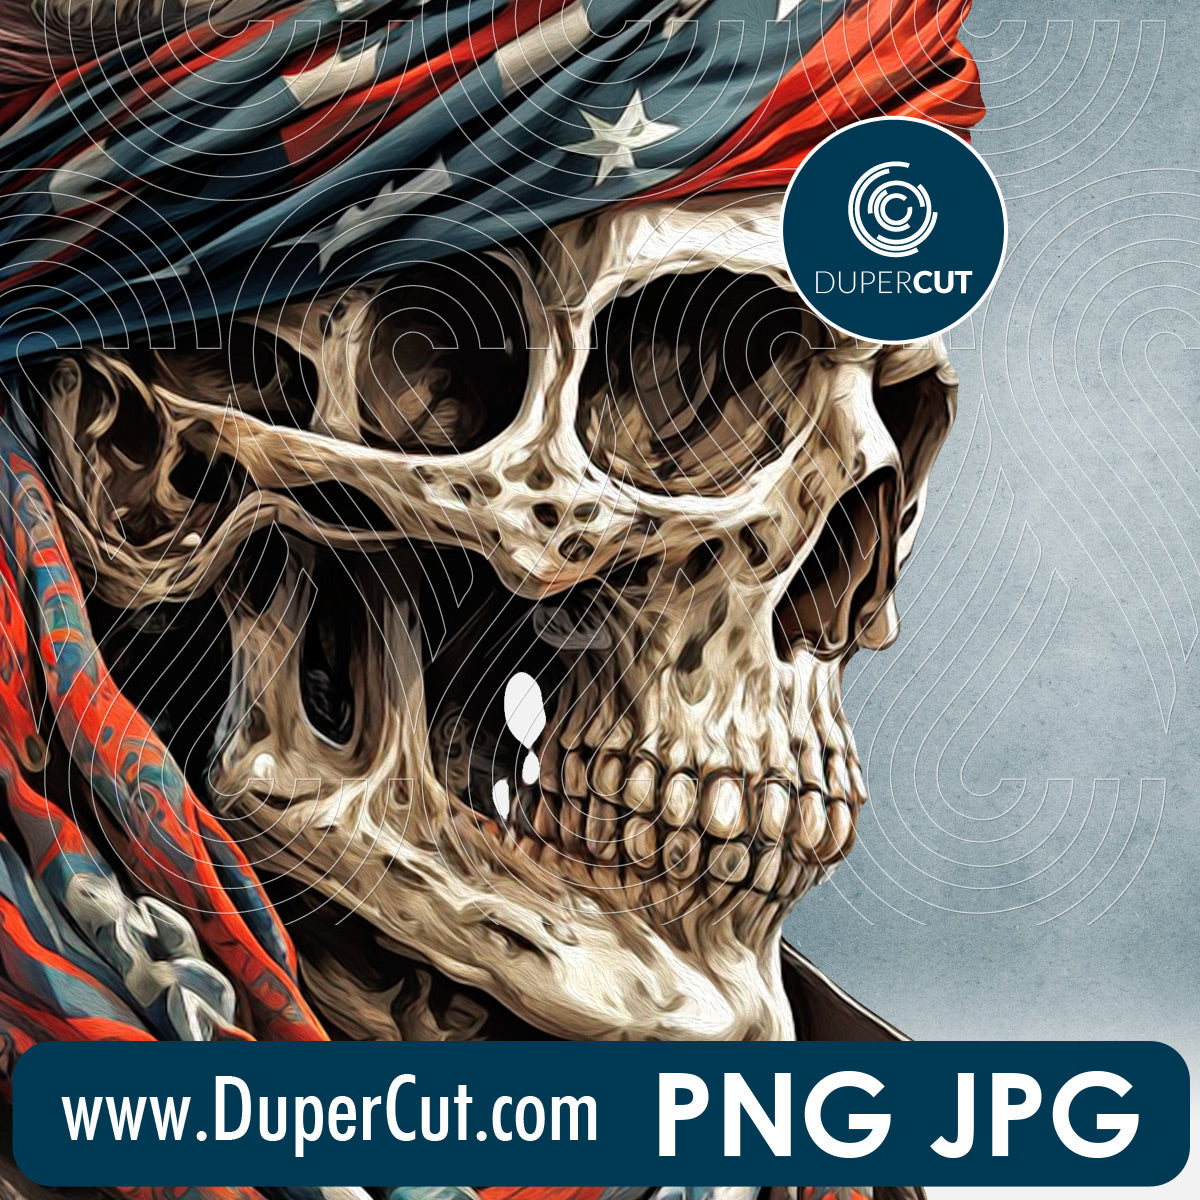 Skull in bandana USA flag - full color files for sublimation, print on demand, high resolution PNG JPG template transparent background by www.dupercut.com